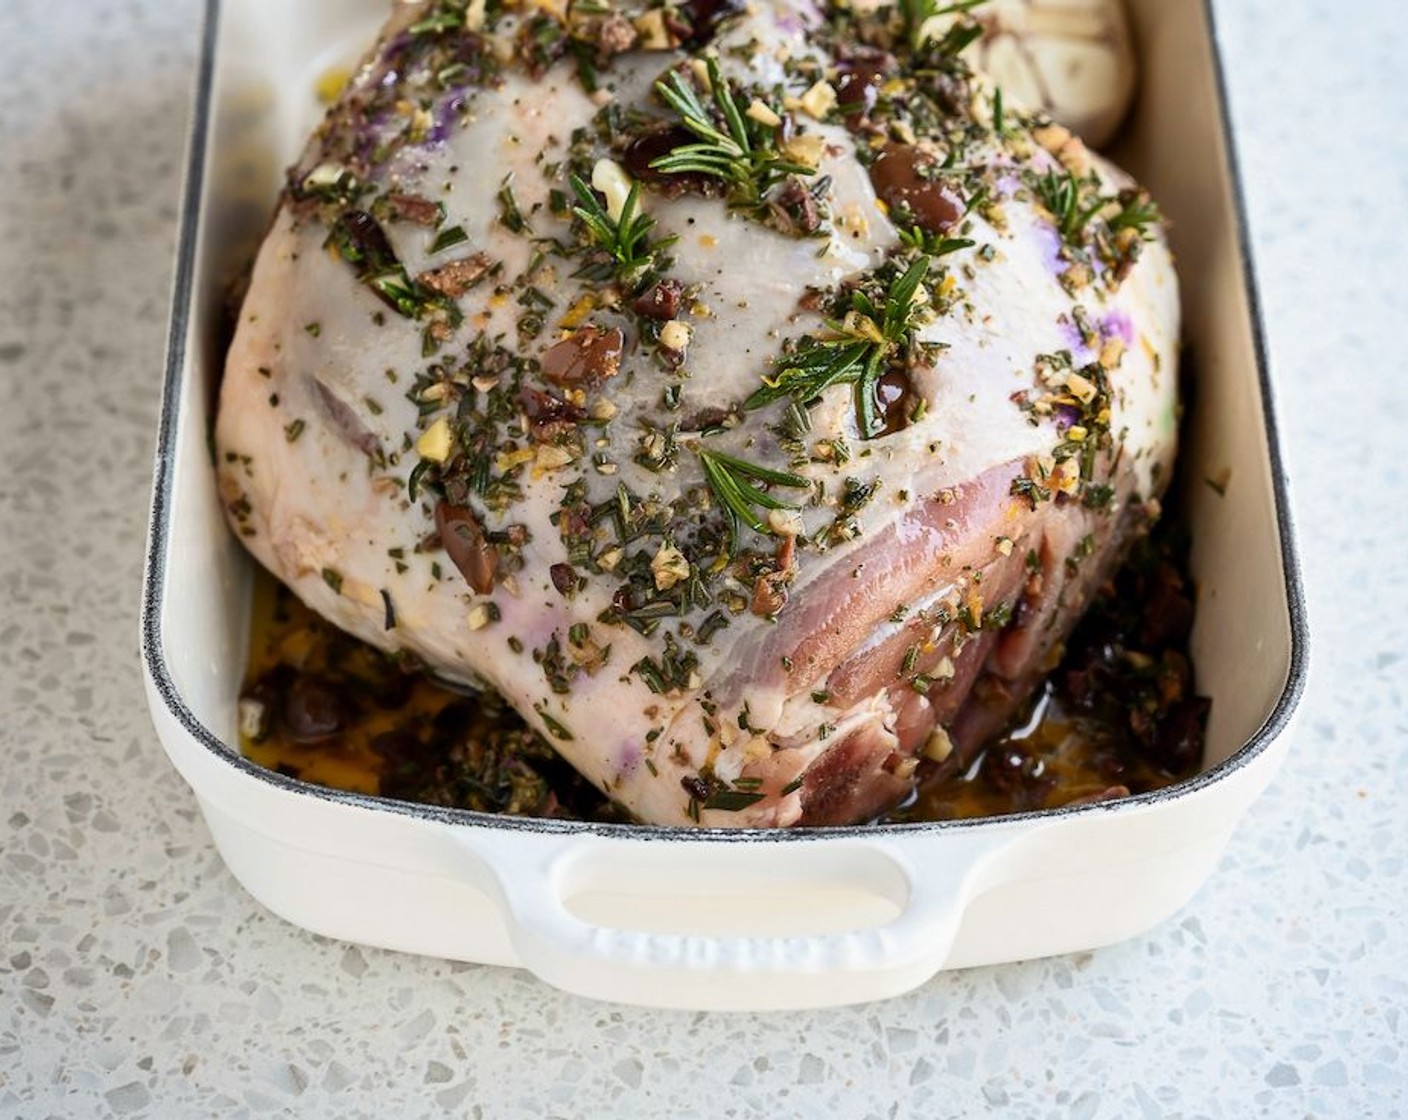 step 6 Arrange this and the remaining Fresh Rosemary (5 sprigs) on the bottom of a large roasting pan. Lower the lamb on to this grid and pour over the marinade. Season the lamb with Coarse Sea Salt (to taste), Ground Black Pepper (to taste), and pour in the Dry White Wine (2 cups).